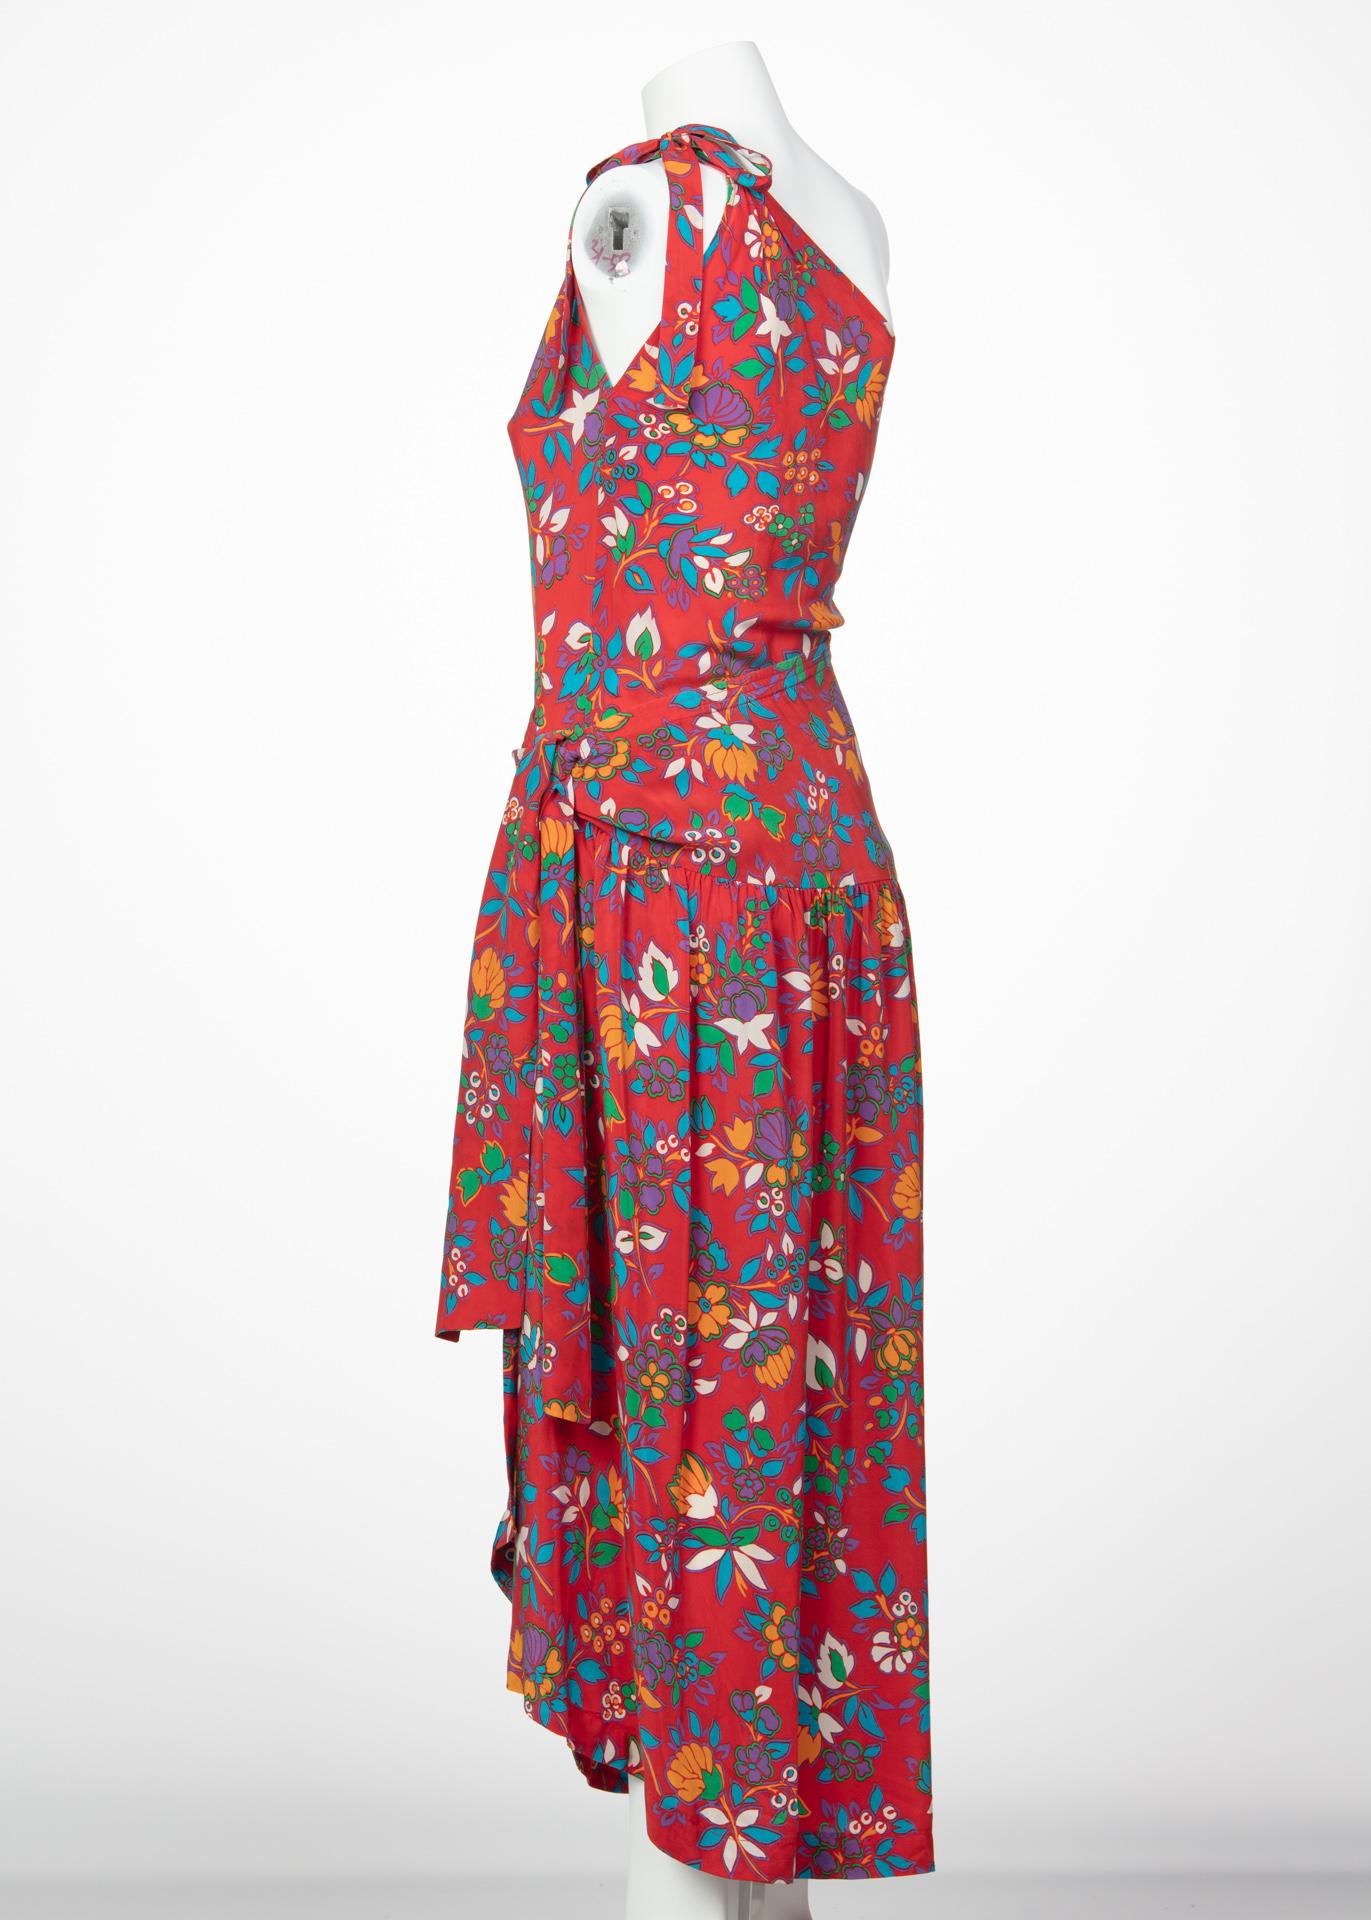 Yves Saint Laurent YSL Multicolor Floral Print Top and Skirt Set, 1980s  4